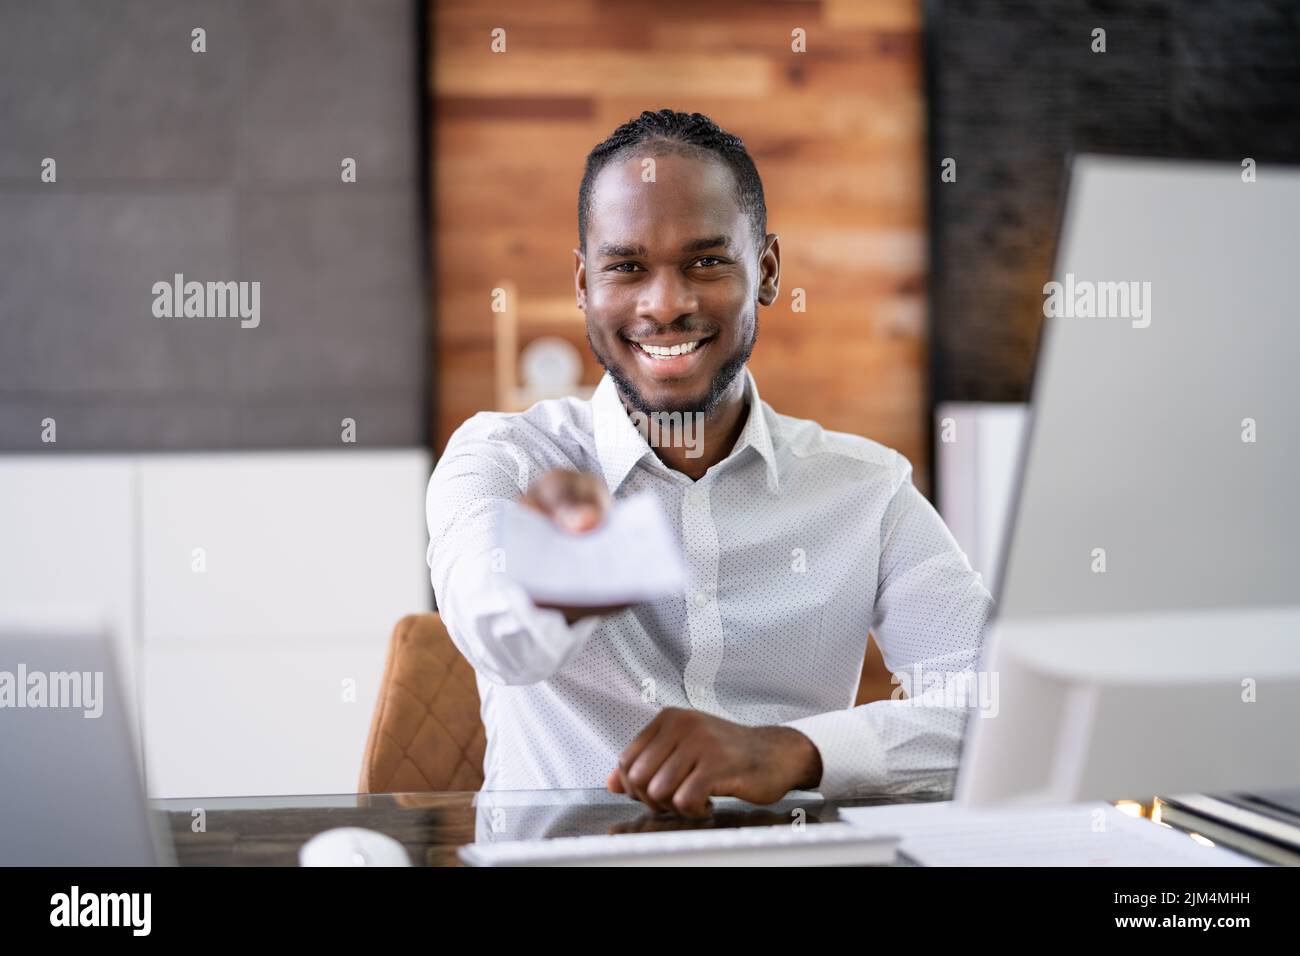 African Business Man Giving Paycheck Or Payroll Cheque Stock Photo